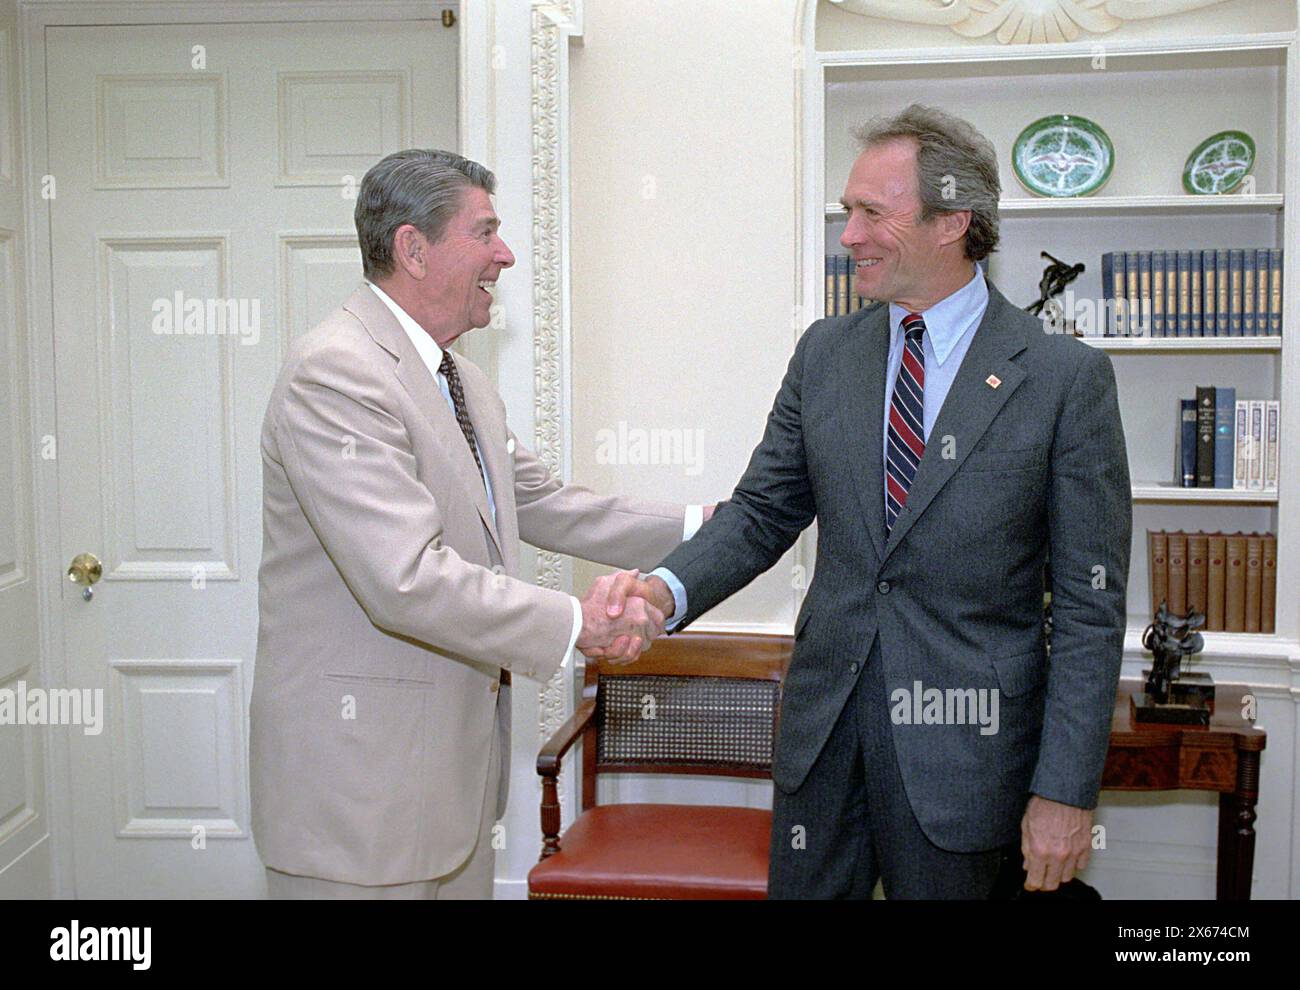 President Ronald Reagan shaking hands with Clint Eastwood in the White House Oval Office before the Take Pride in America event. Washington, DC, White House Photograph Office, 7-21-1987. Stock Photo